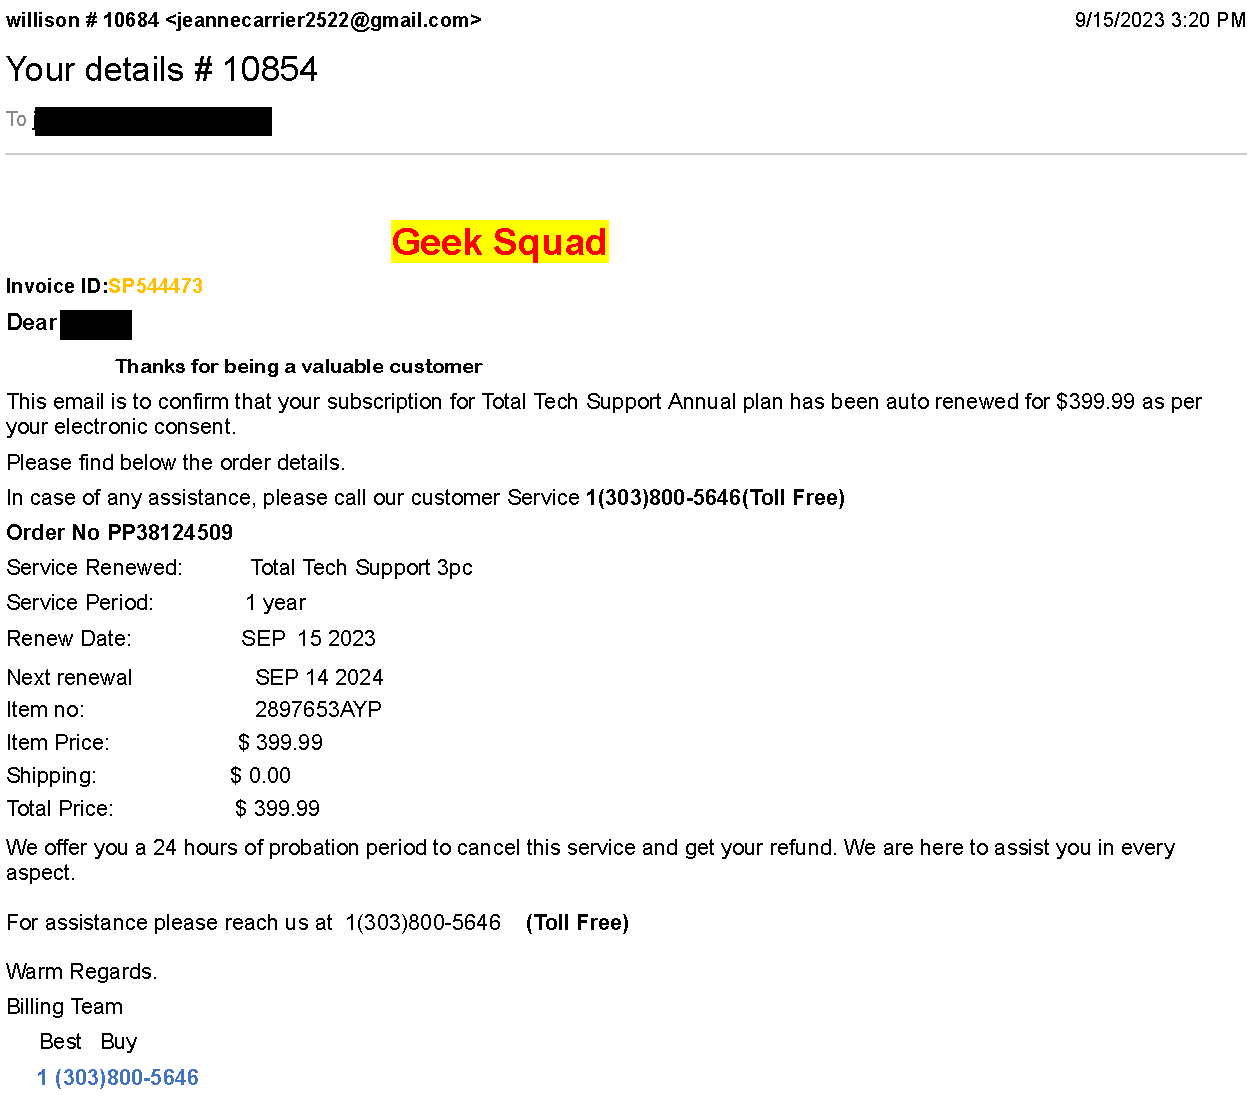 Xfinity Connect Your details _ 10854 Printout_Redacted